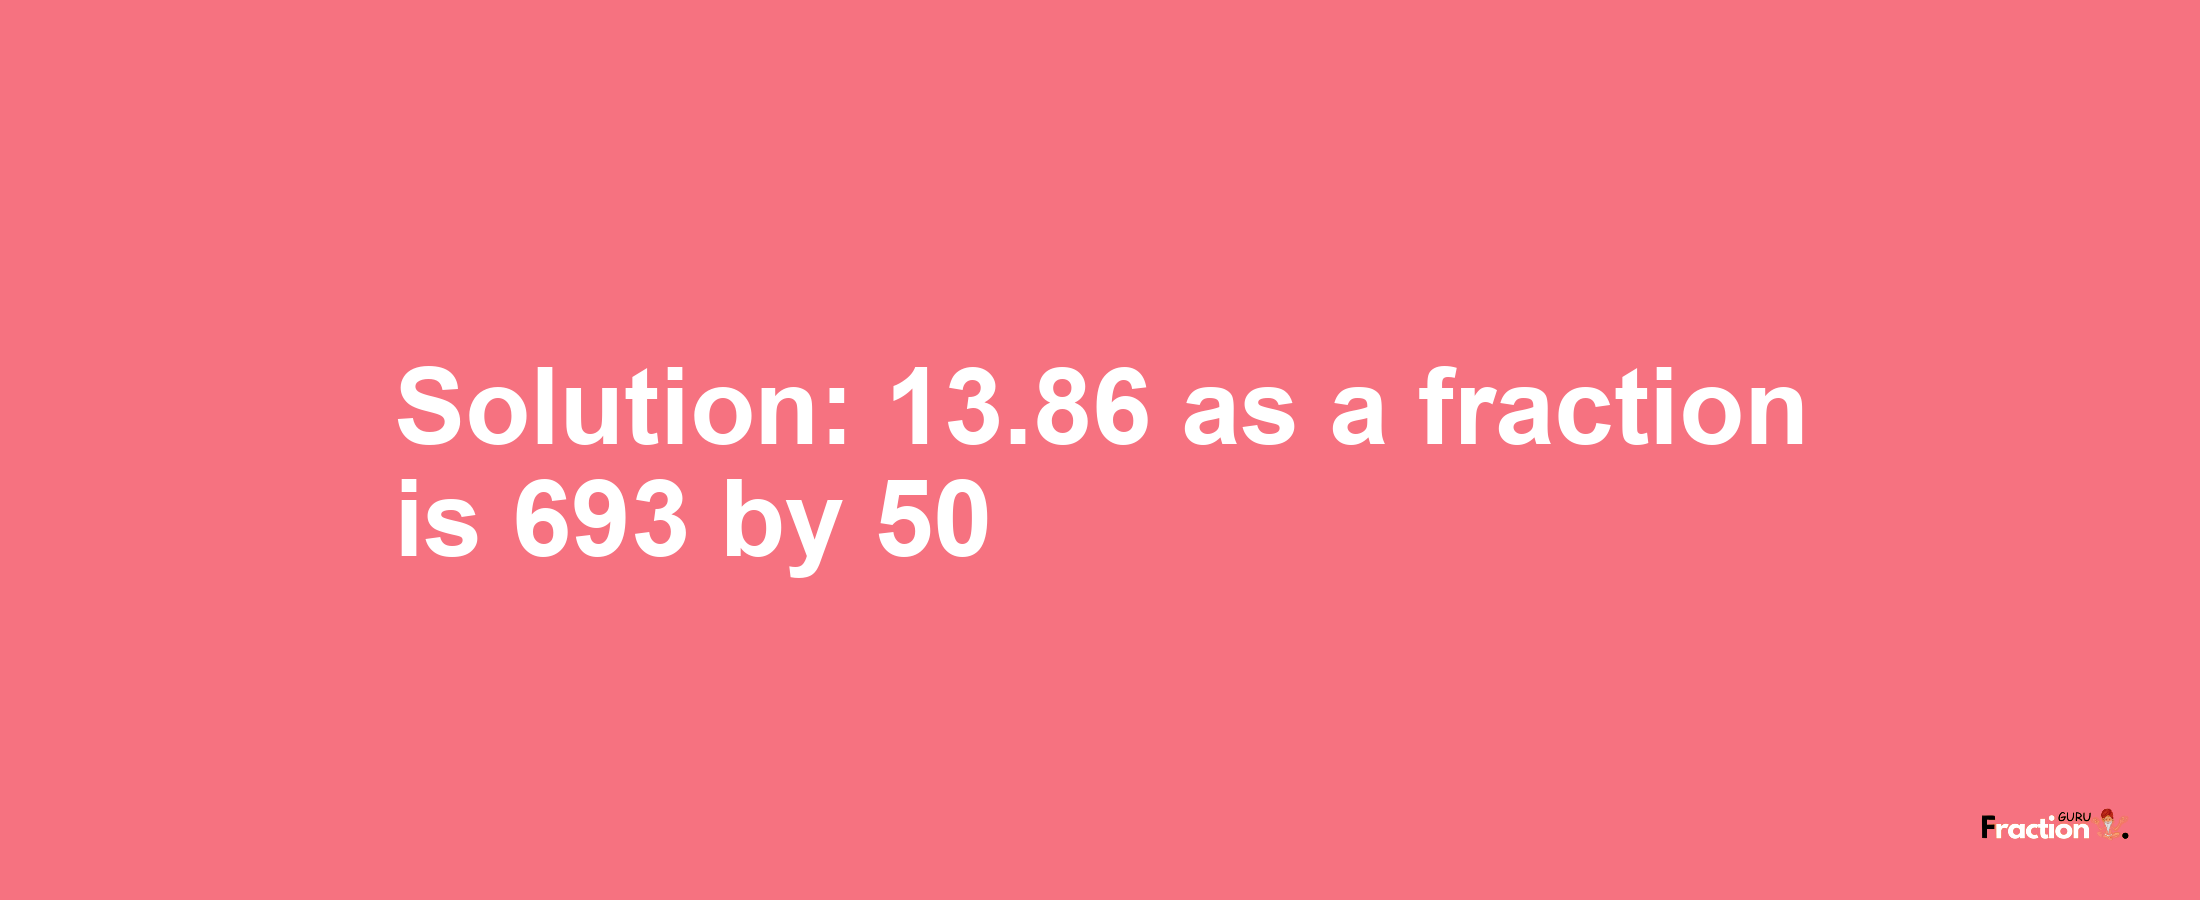 Solution:13.86 as a fraction is 693/50